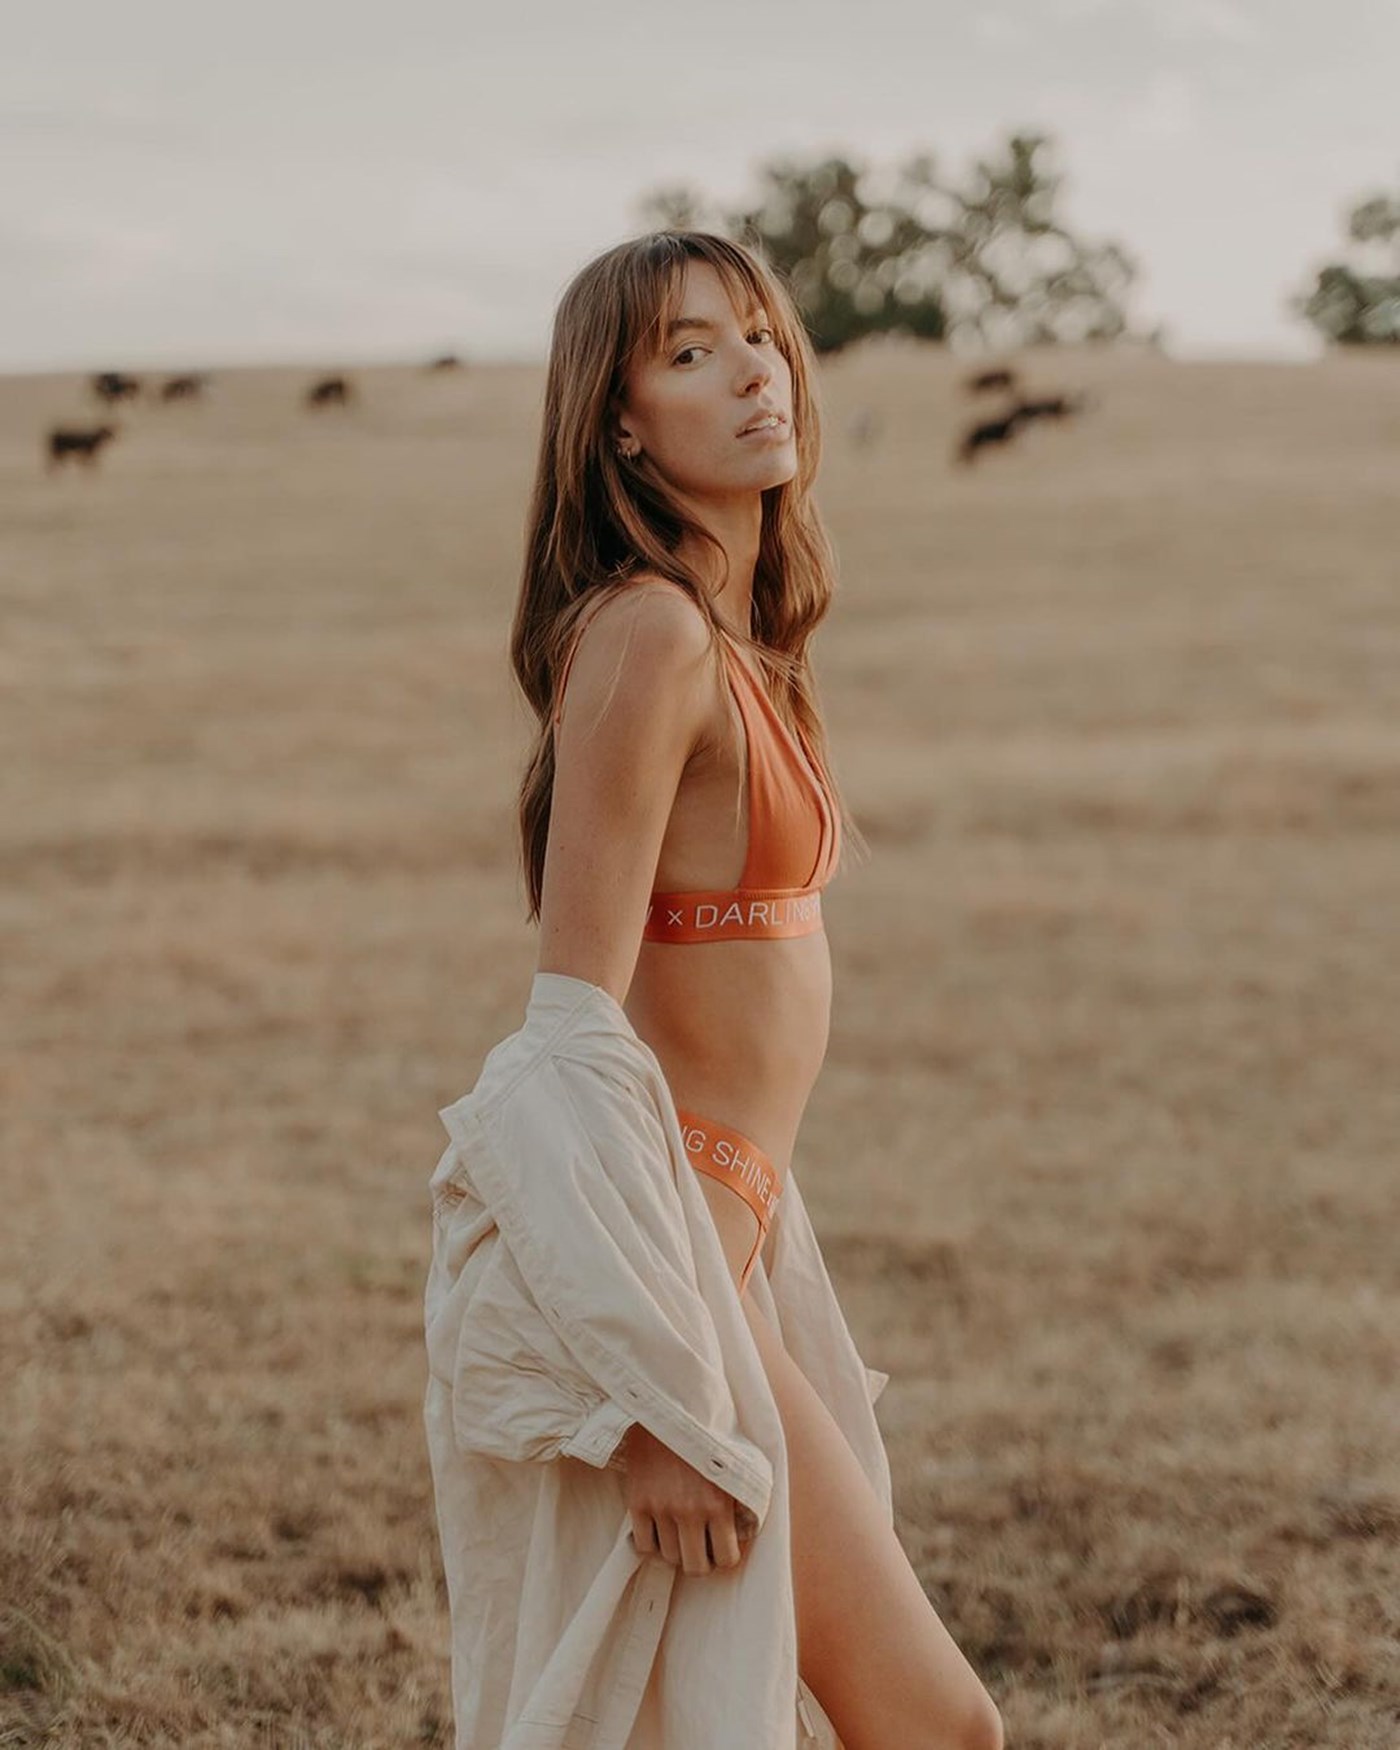 The Stylish Lingerie Brands in Australia You Need to Know About